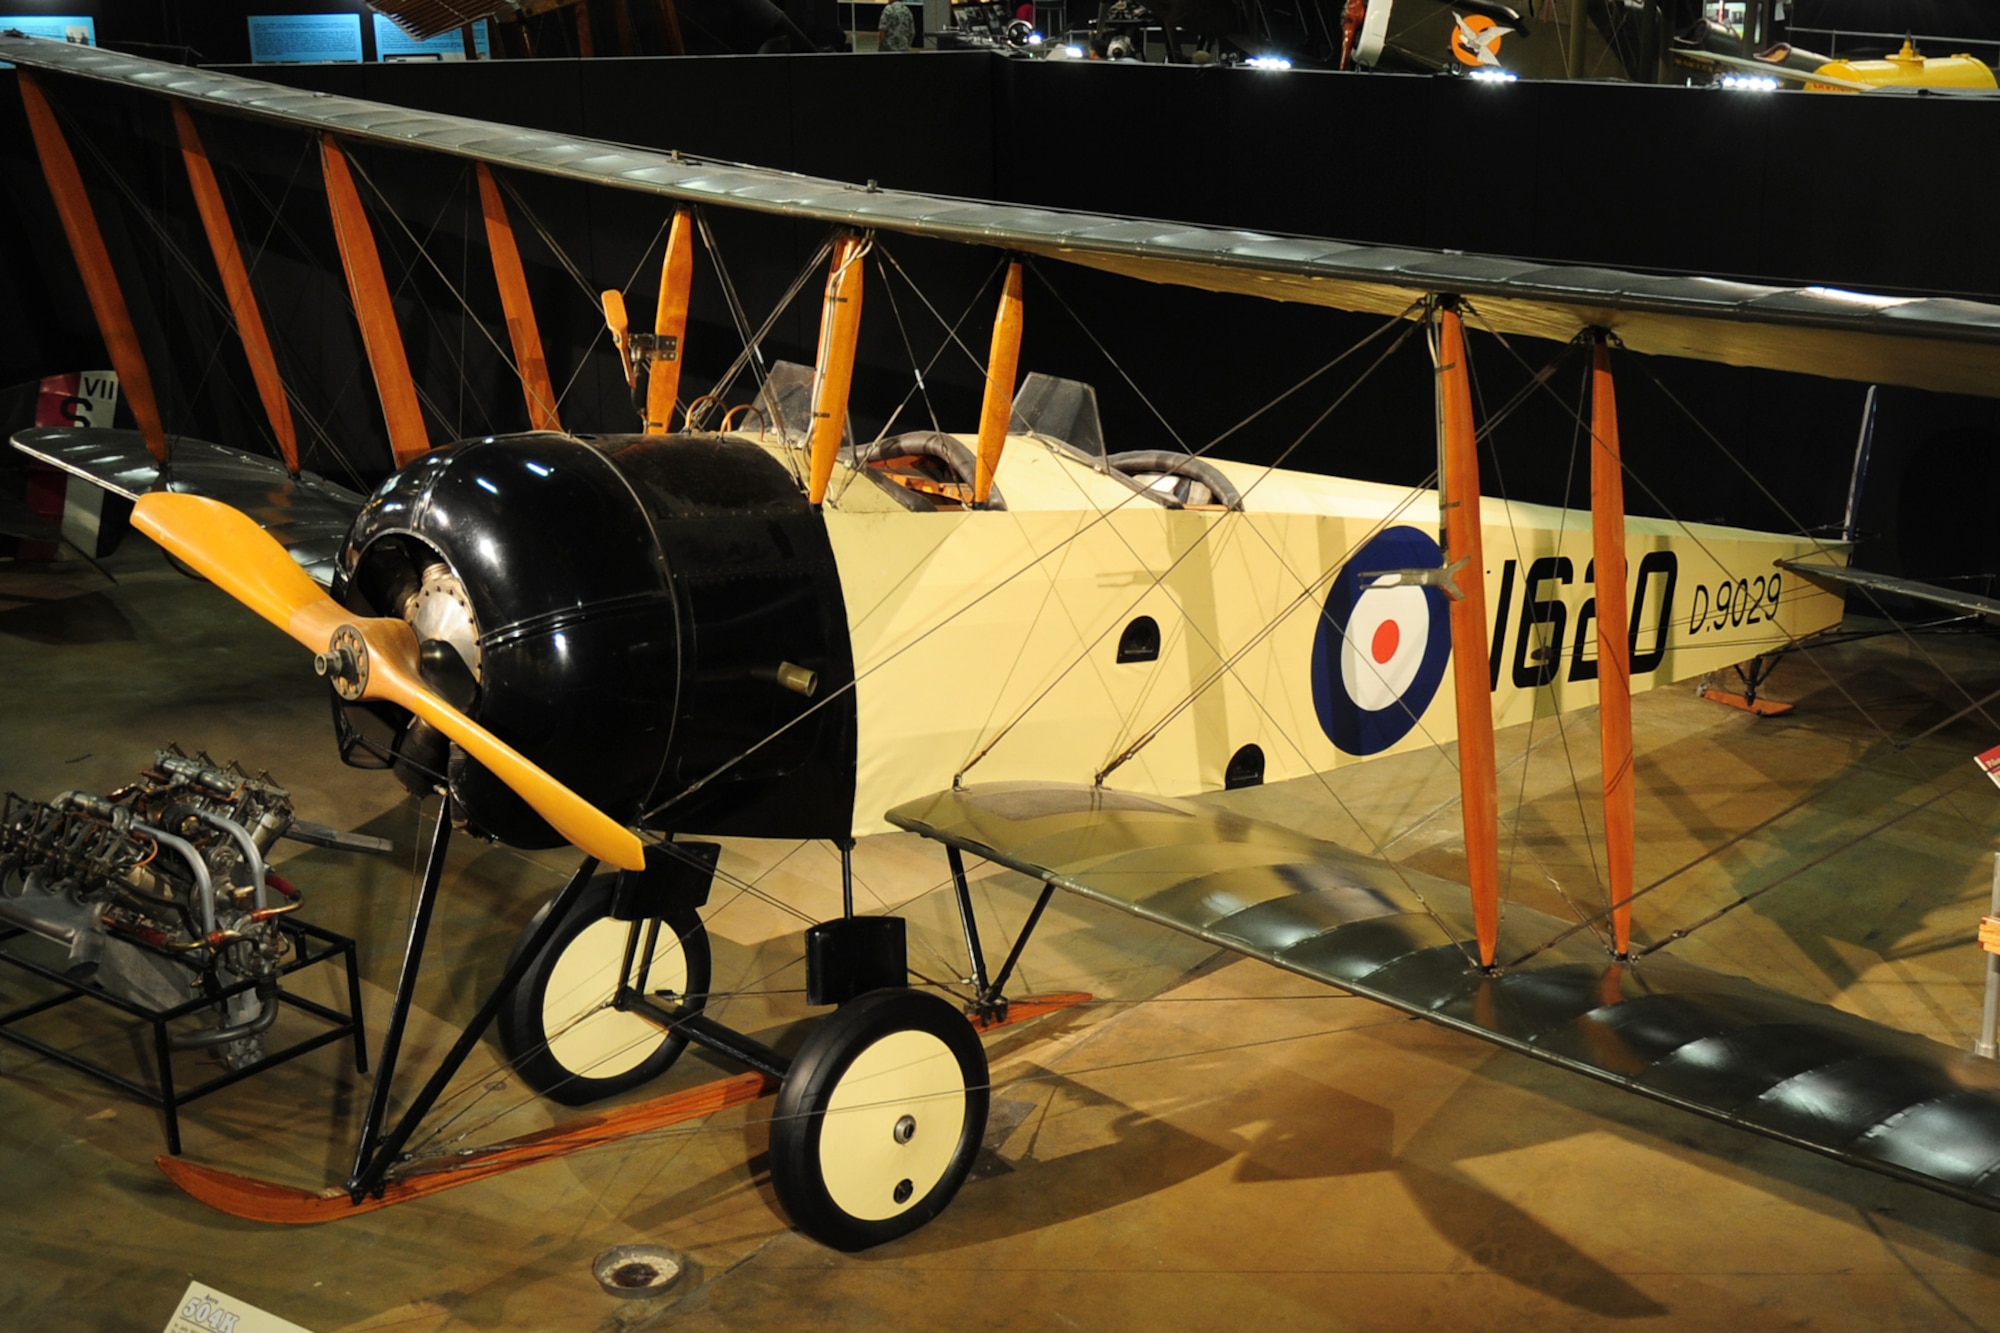 DAYTON, Ohio -- Avro 504K in the Early Years Gallery at the National Museum of the United States Air Force. (U.S. Air Force photo)